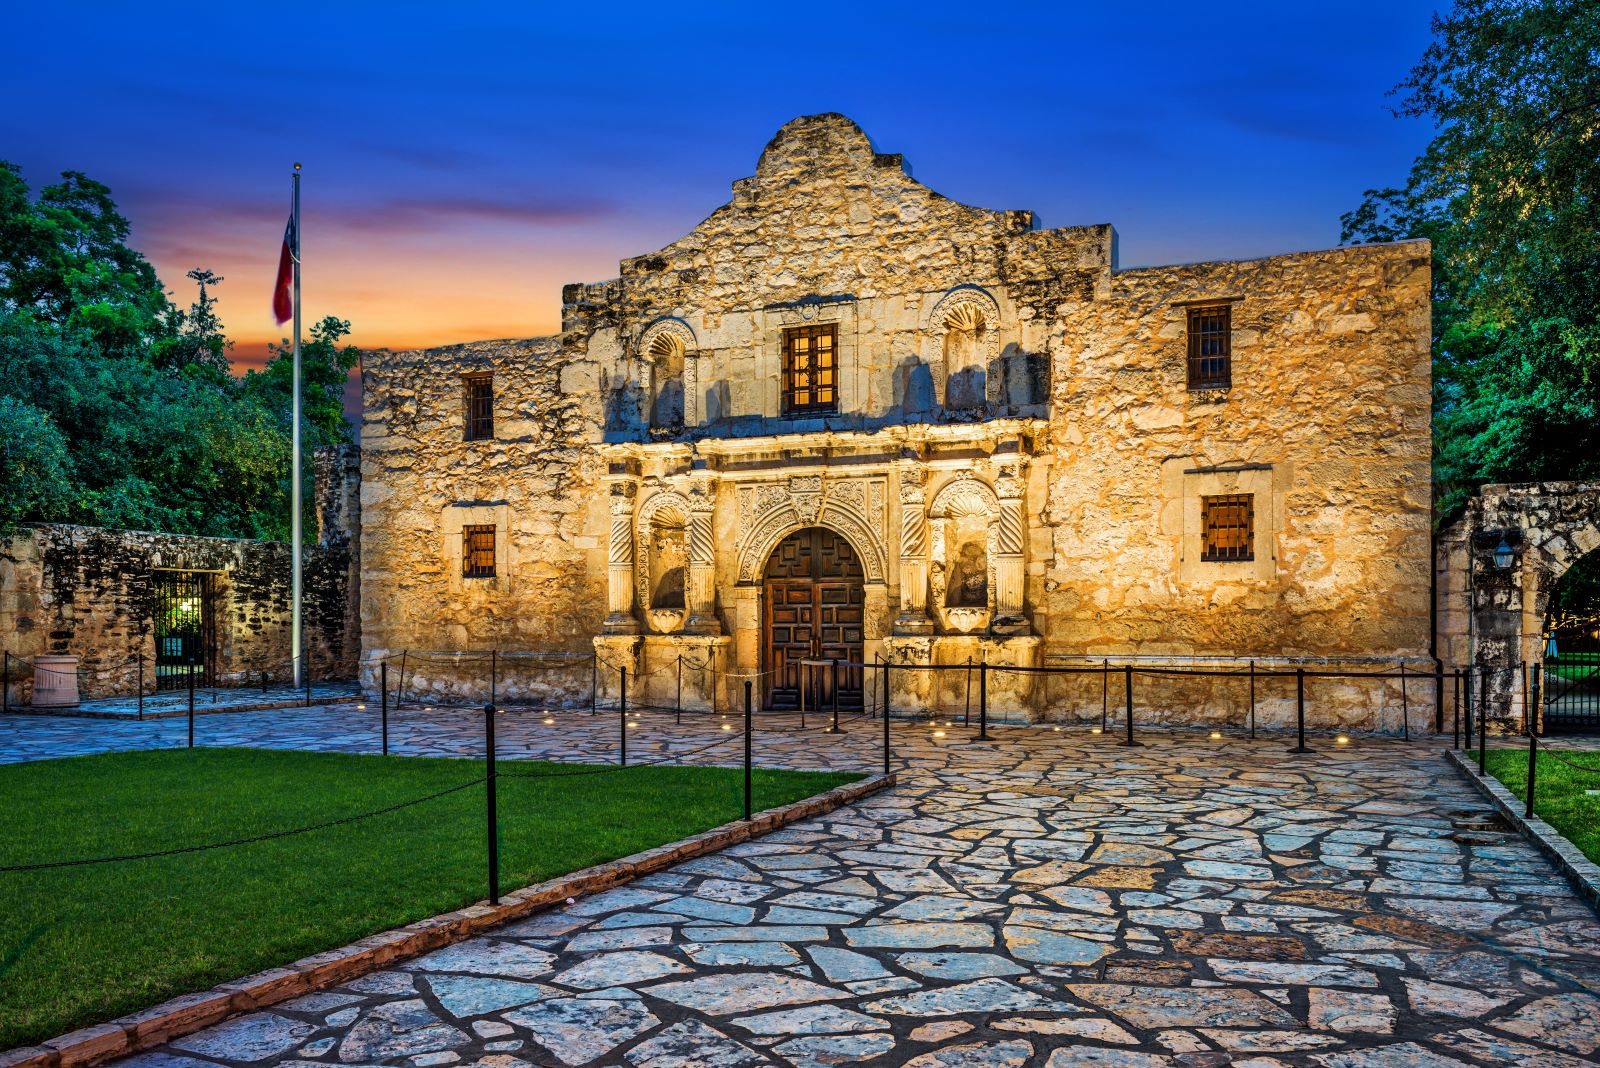 Image credit: Shutterstock / Sean Pavone <p>Discover the rich history of the Alamo and enjoy the scenic River Walk. A daily budget of $70 covers meals, attractions, and accommodations.</p>